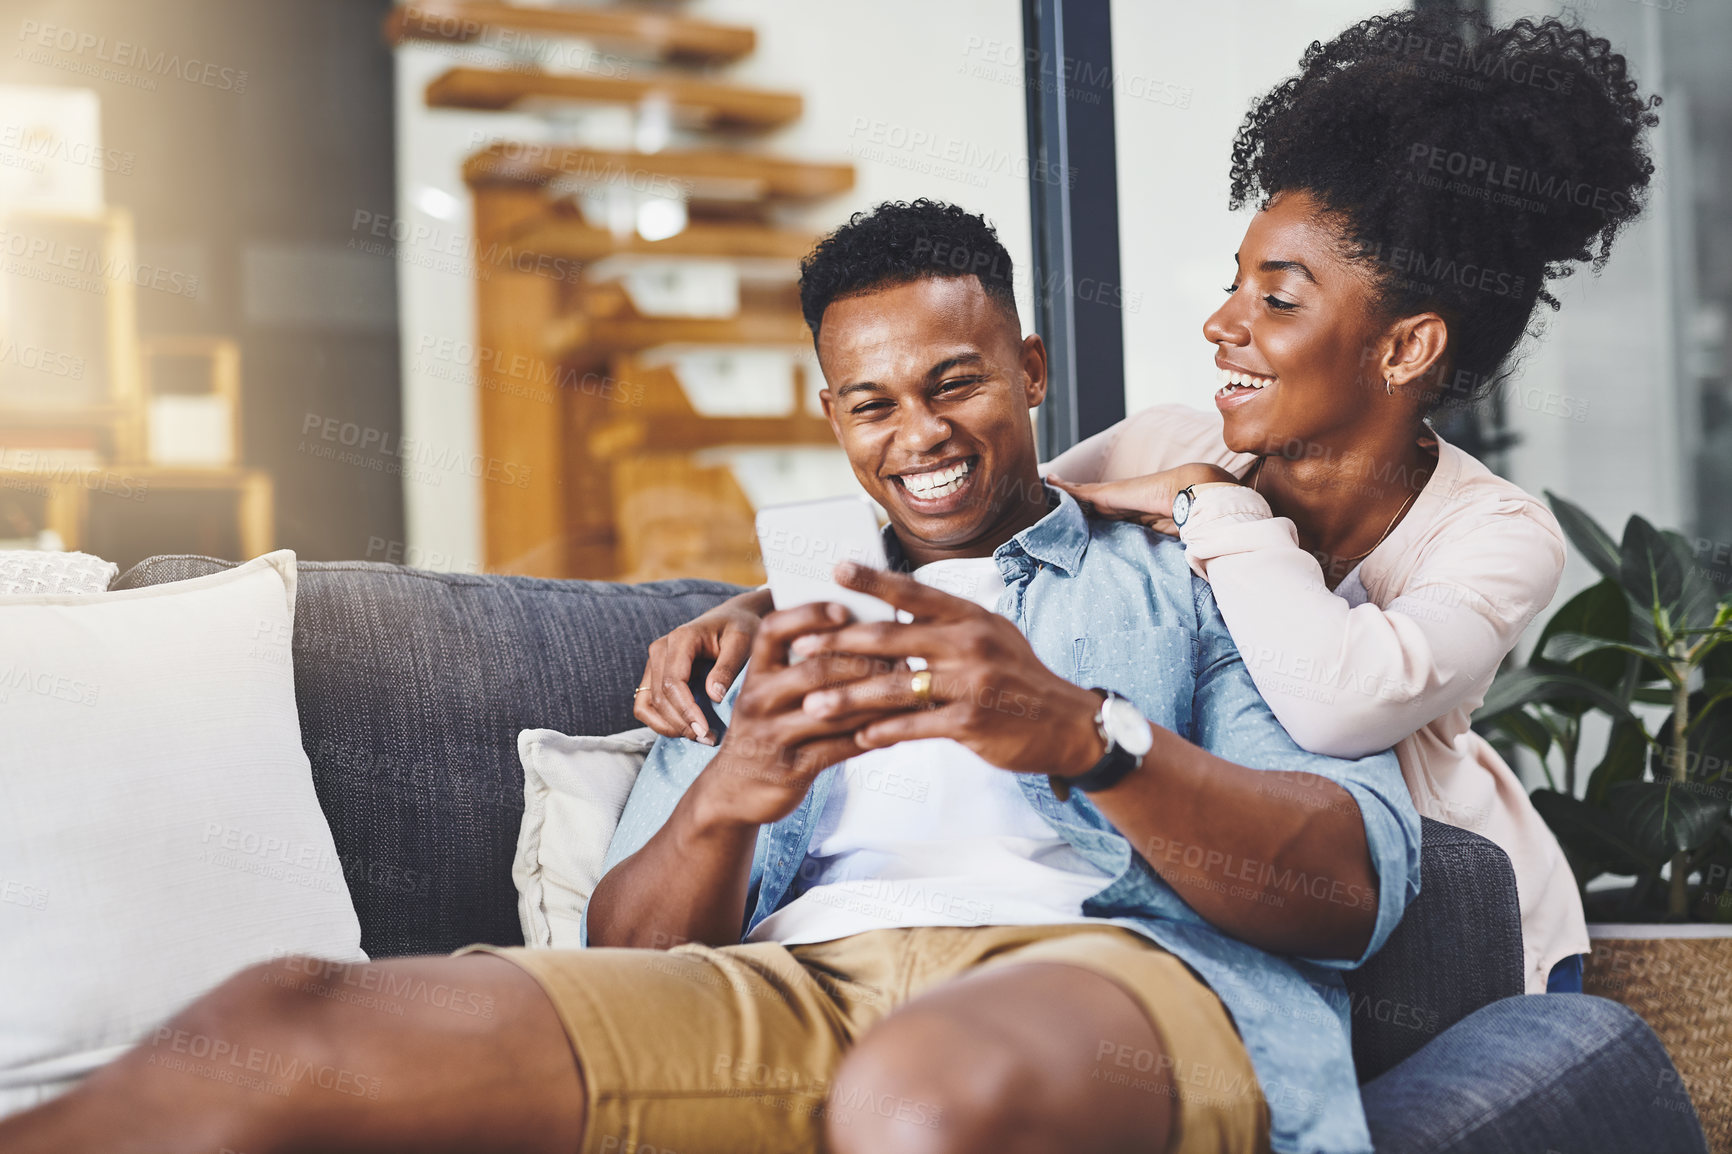 Buy stock photo Shot of a happy young couple using a mobile phone together on the sofa at home